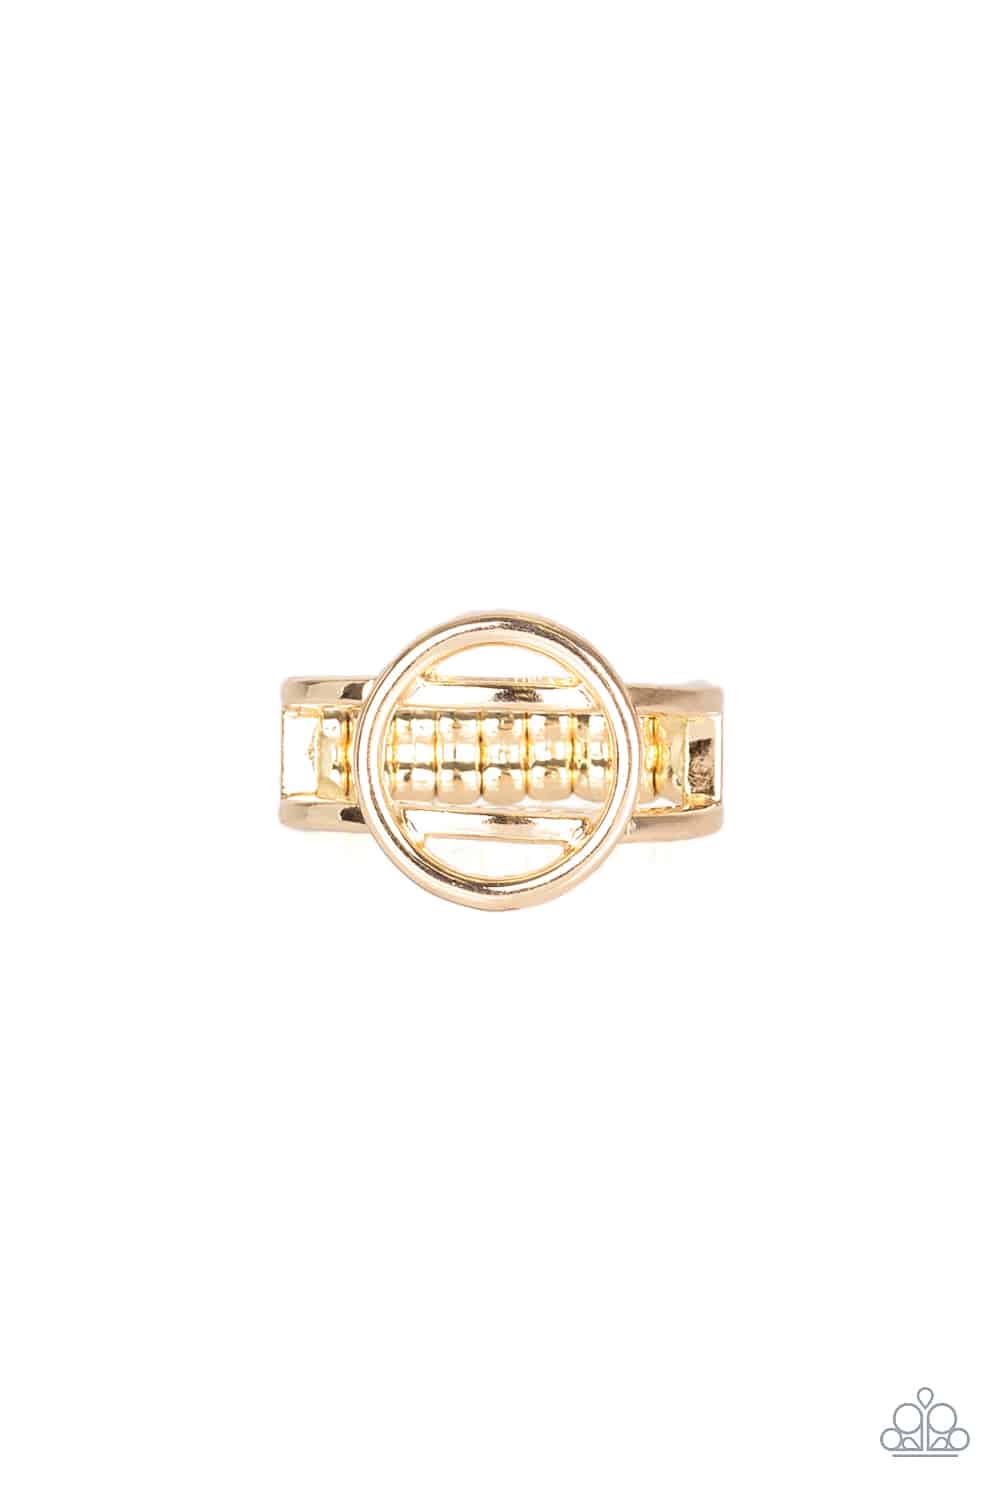 City Center Chic - Rose Gold Ring - Princess Glam Shop